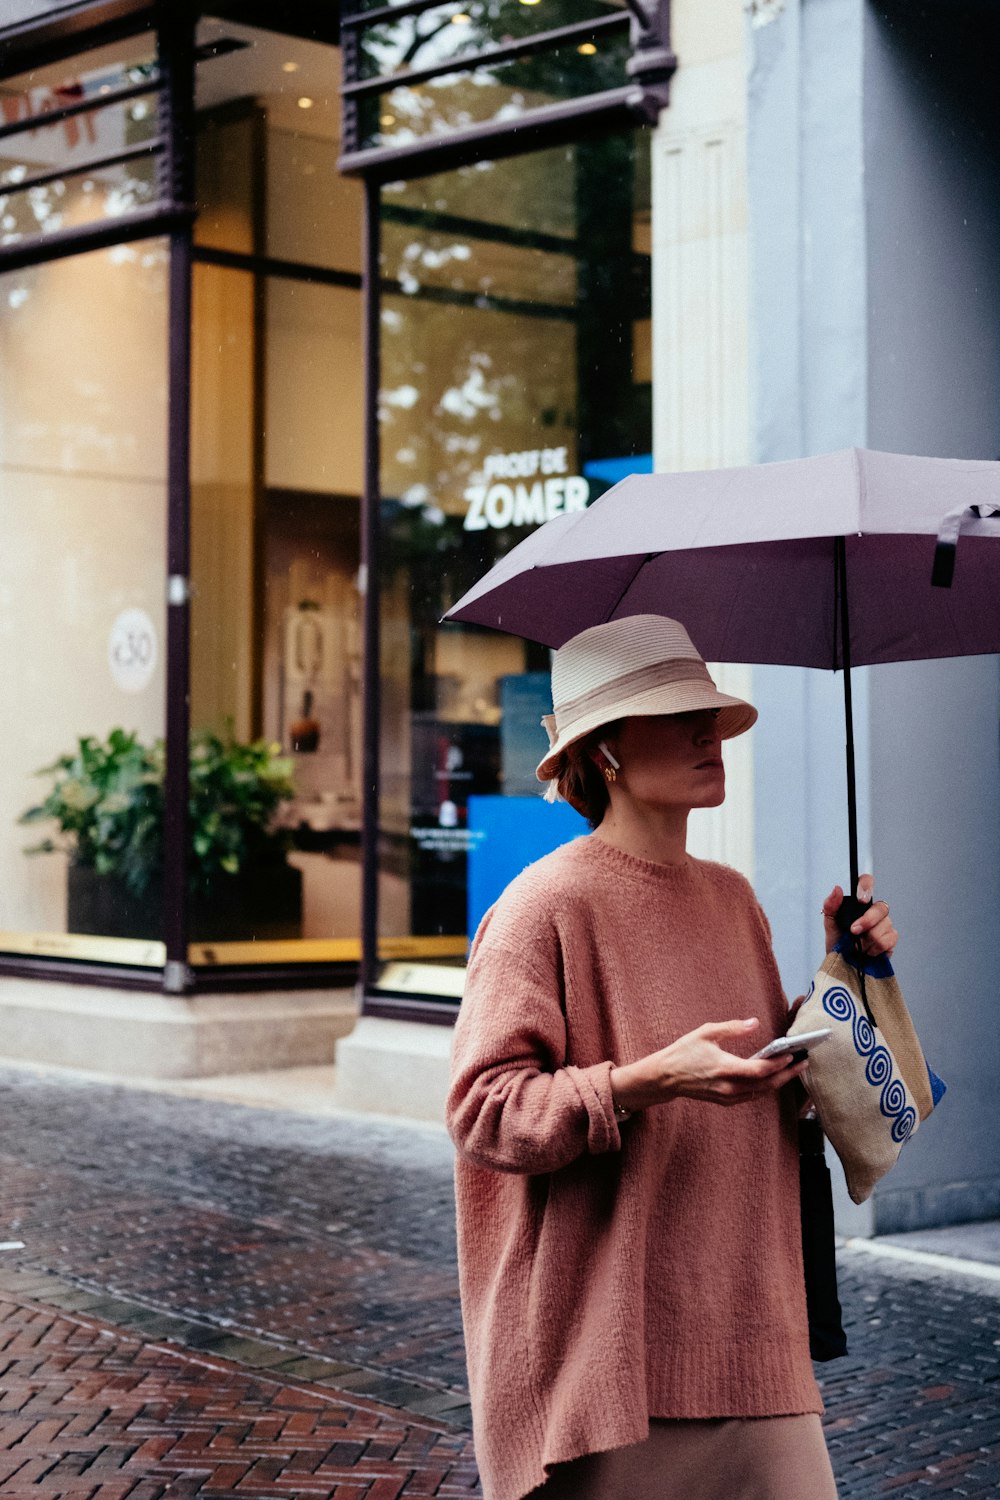 woman holding smartphone and umbrella while walking near building